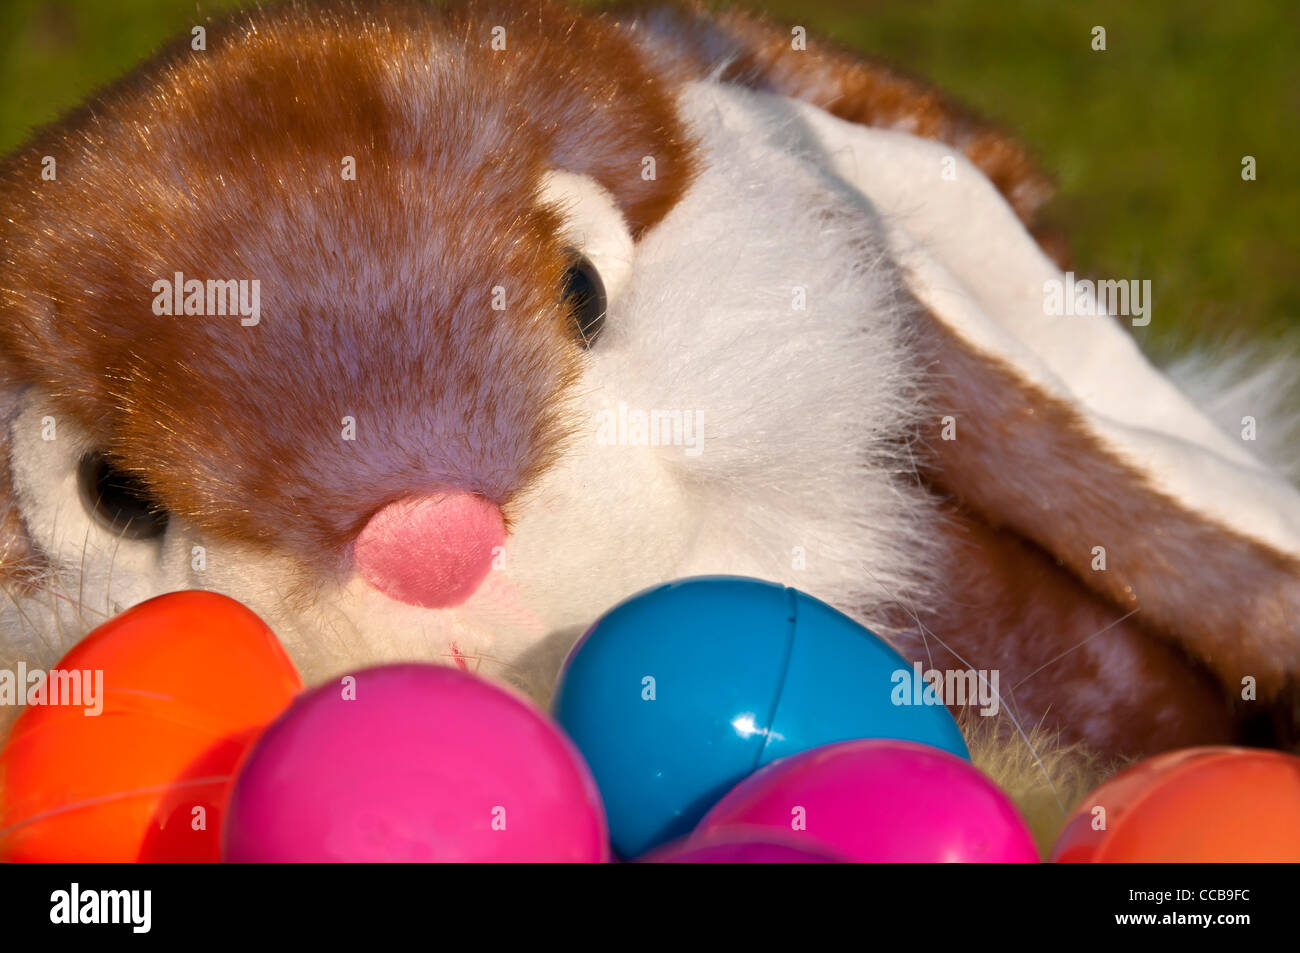 Easter bunny closeup behind pile of plastic colored Easter eggs Stock Photo